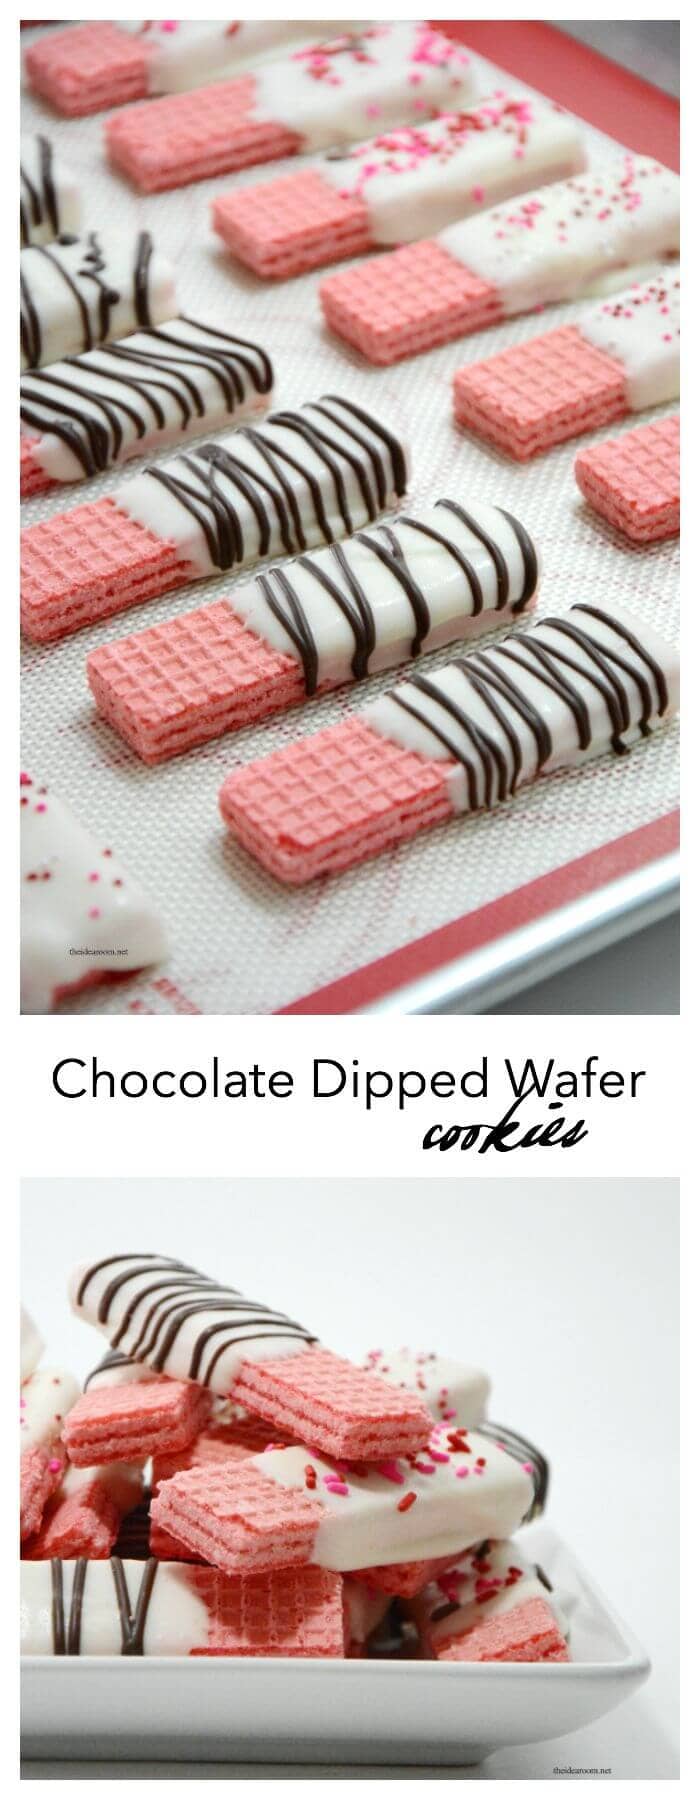 Dip a Wafer Cookie in Chocolate